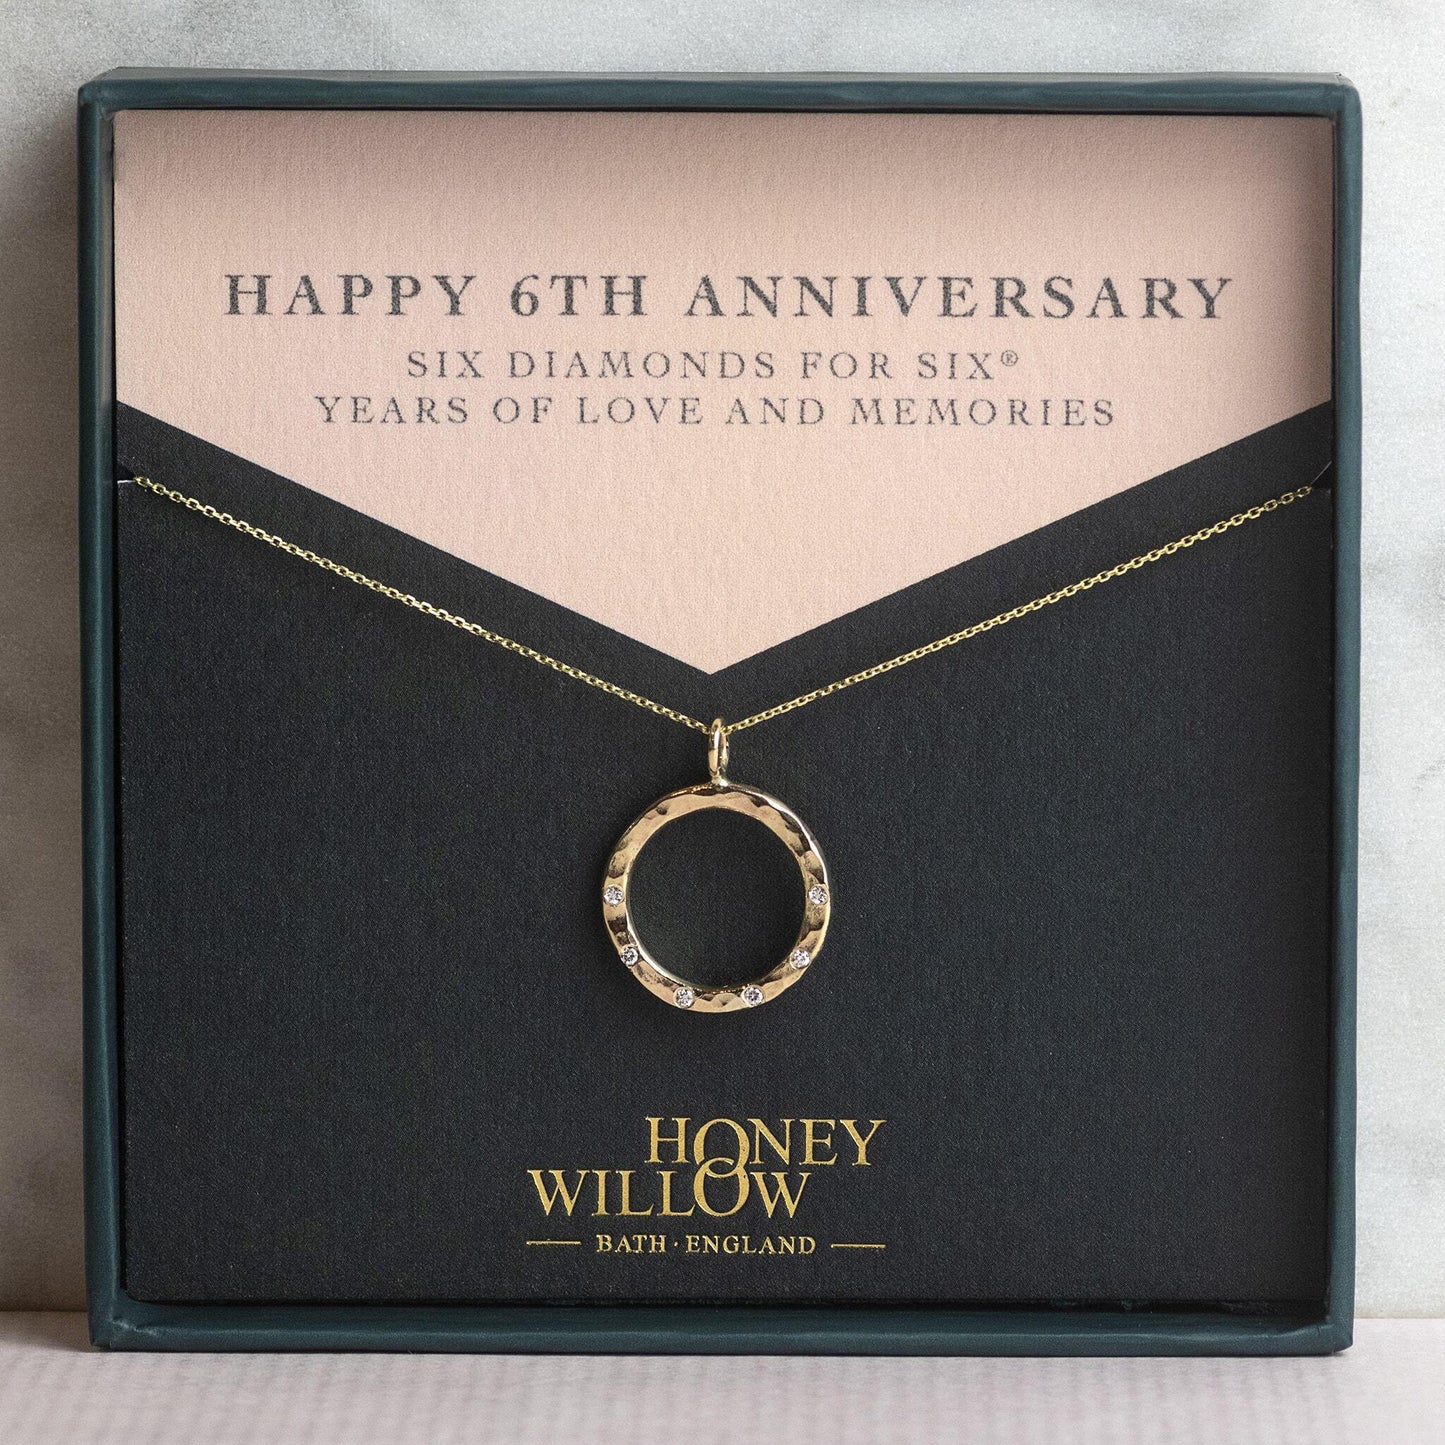 6th Anniversary Gift - 9kt Gold Diamond Halo Necklace - 6 Diamonds for 6® Years